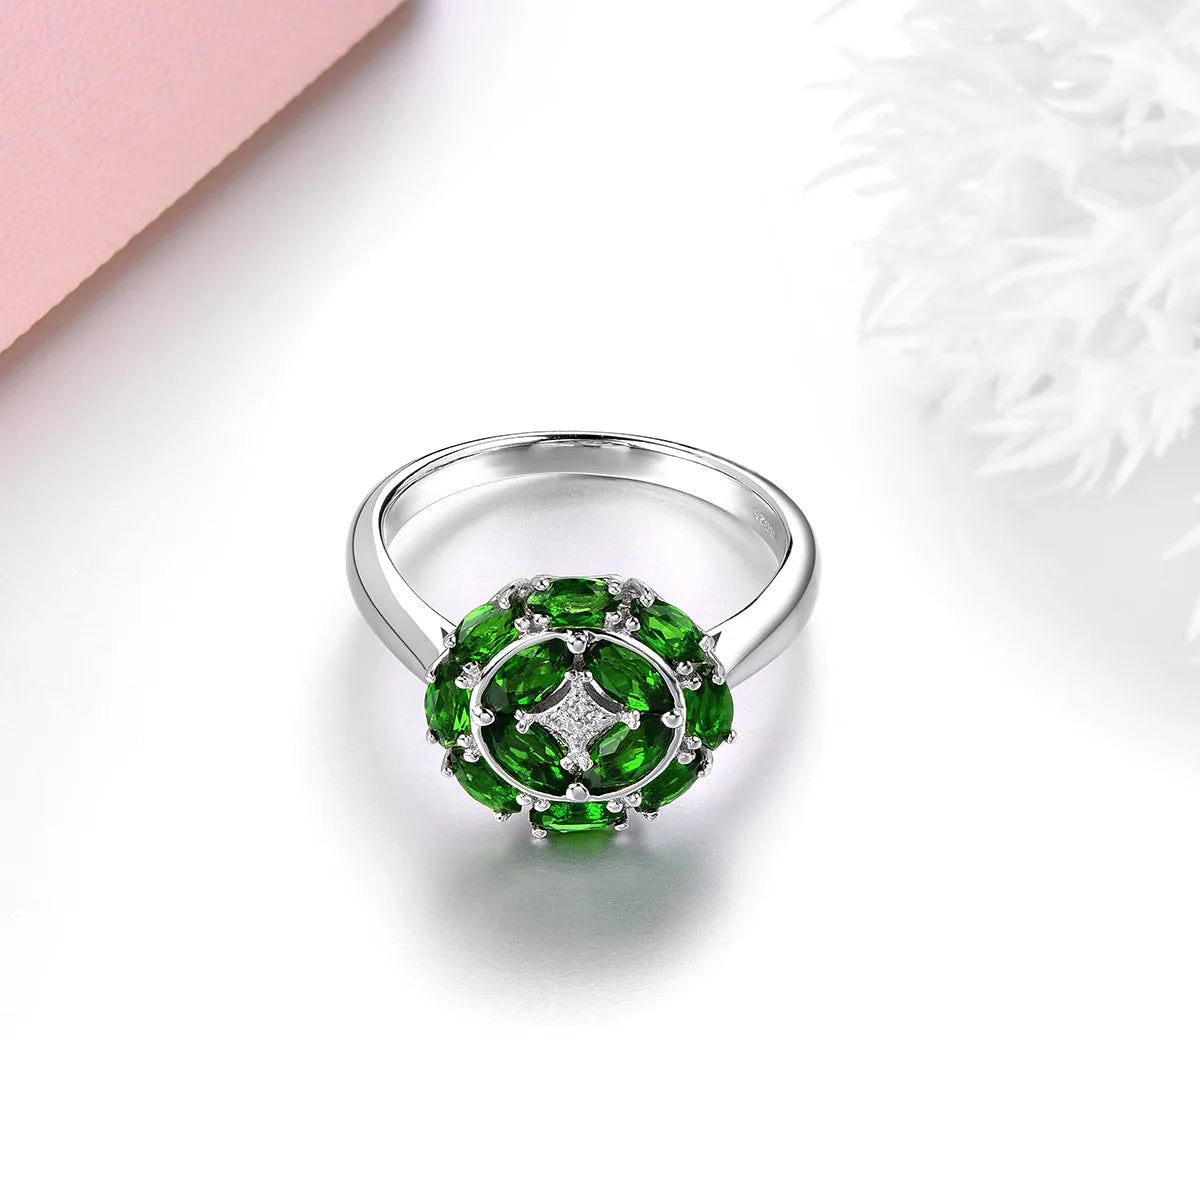 Natural Chrome Diopside Sterling Silver Rings 1.5 Carats Genuine Deep Green Gemstone Women Classic Design Jewelry Style S925